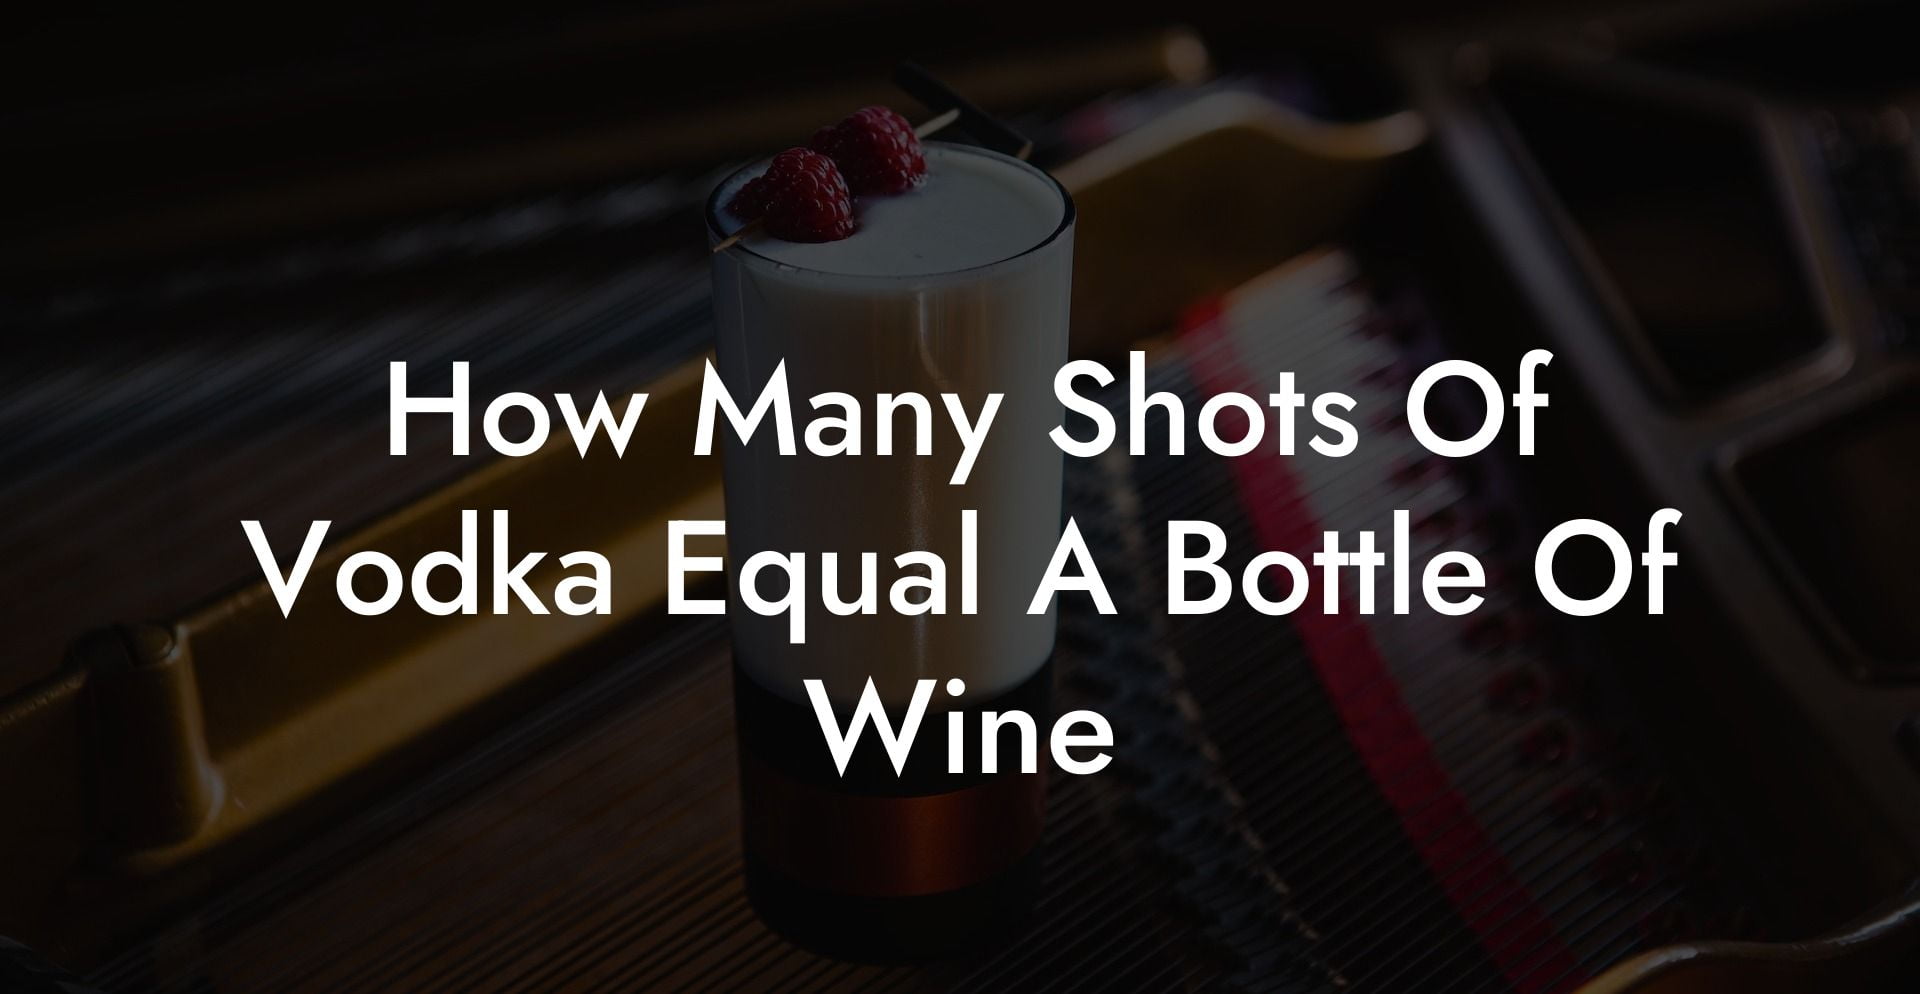 How Many Shots Of Vodka Equal A Bottle Of Wine